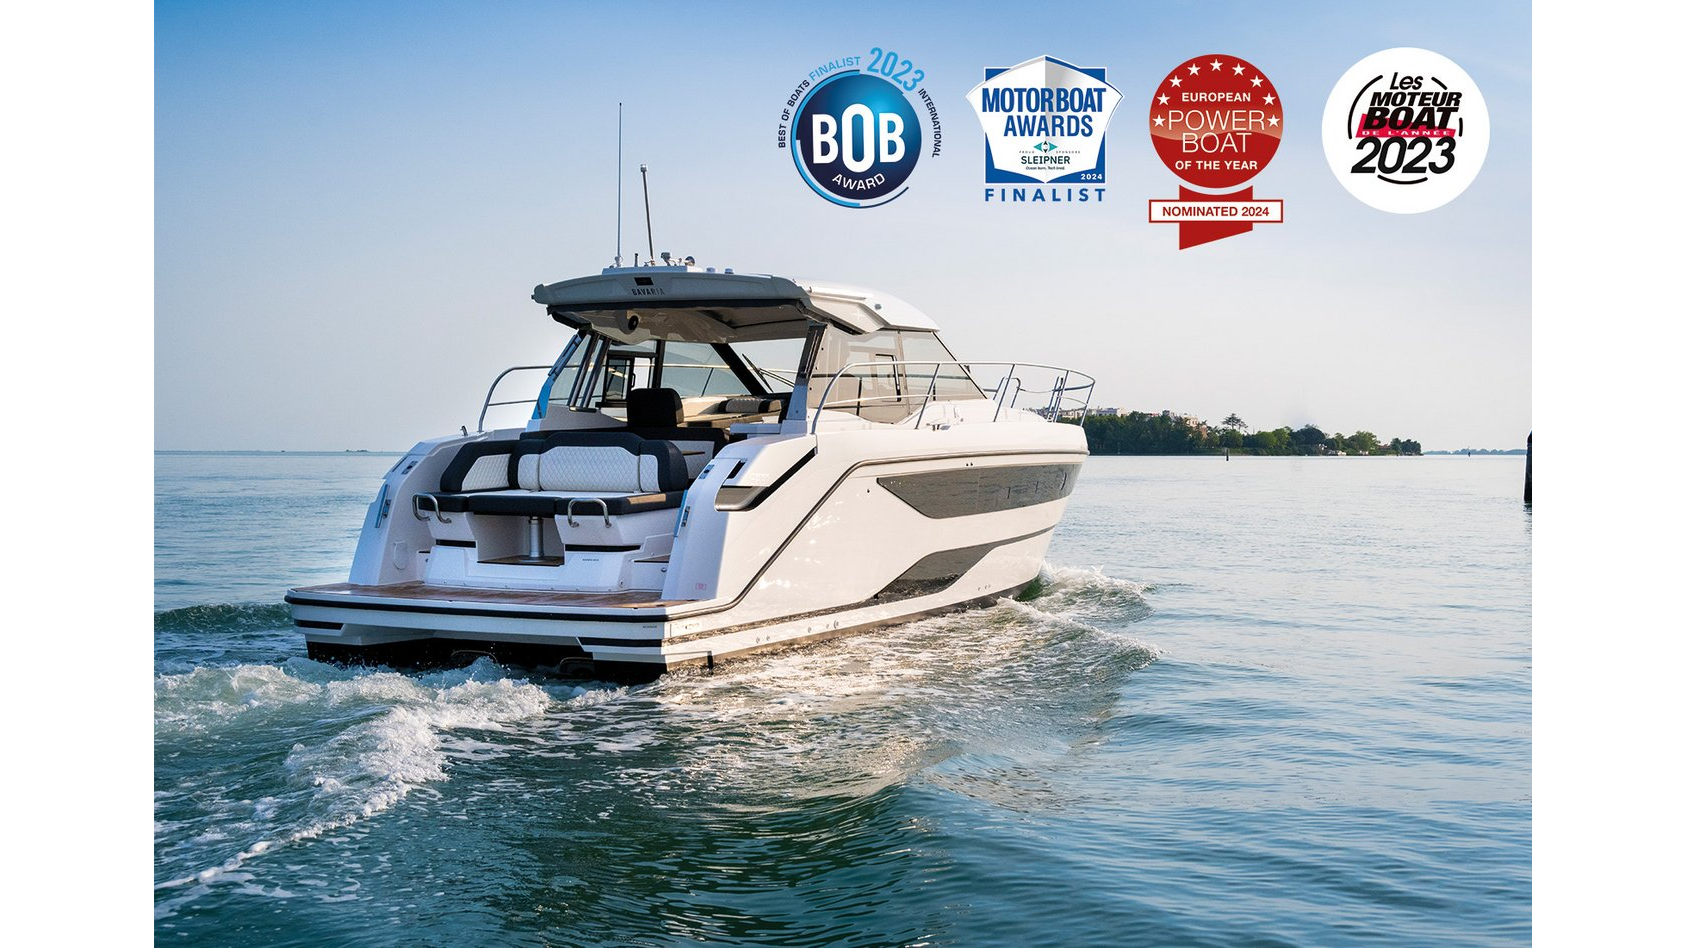 More success for Bavaria's SR Line of Sports Cruisers